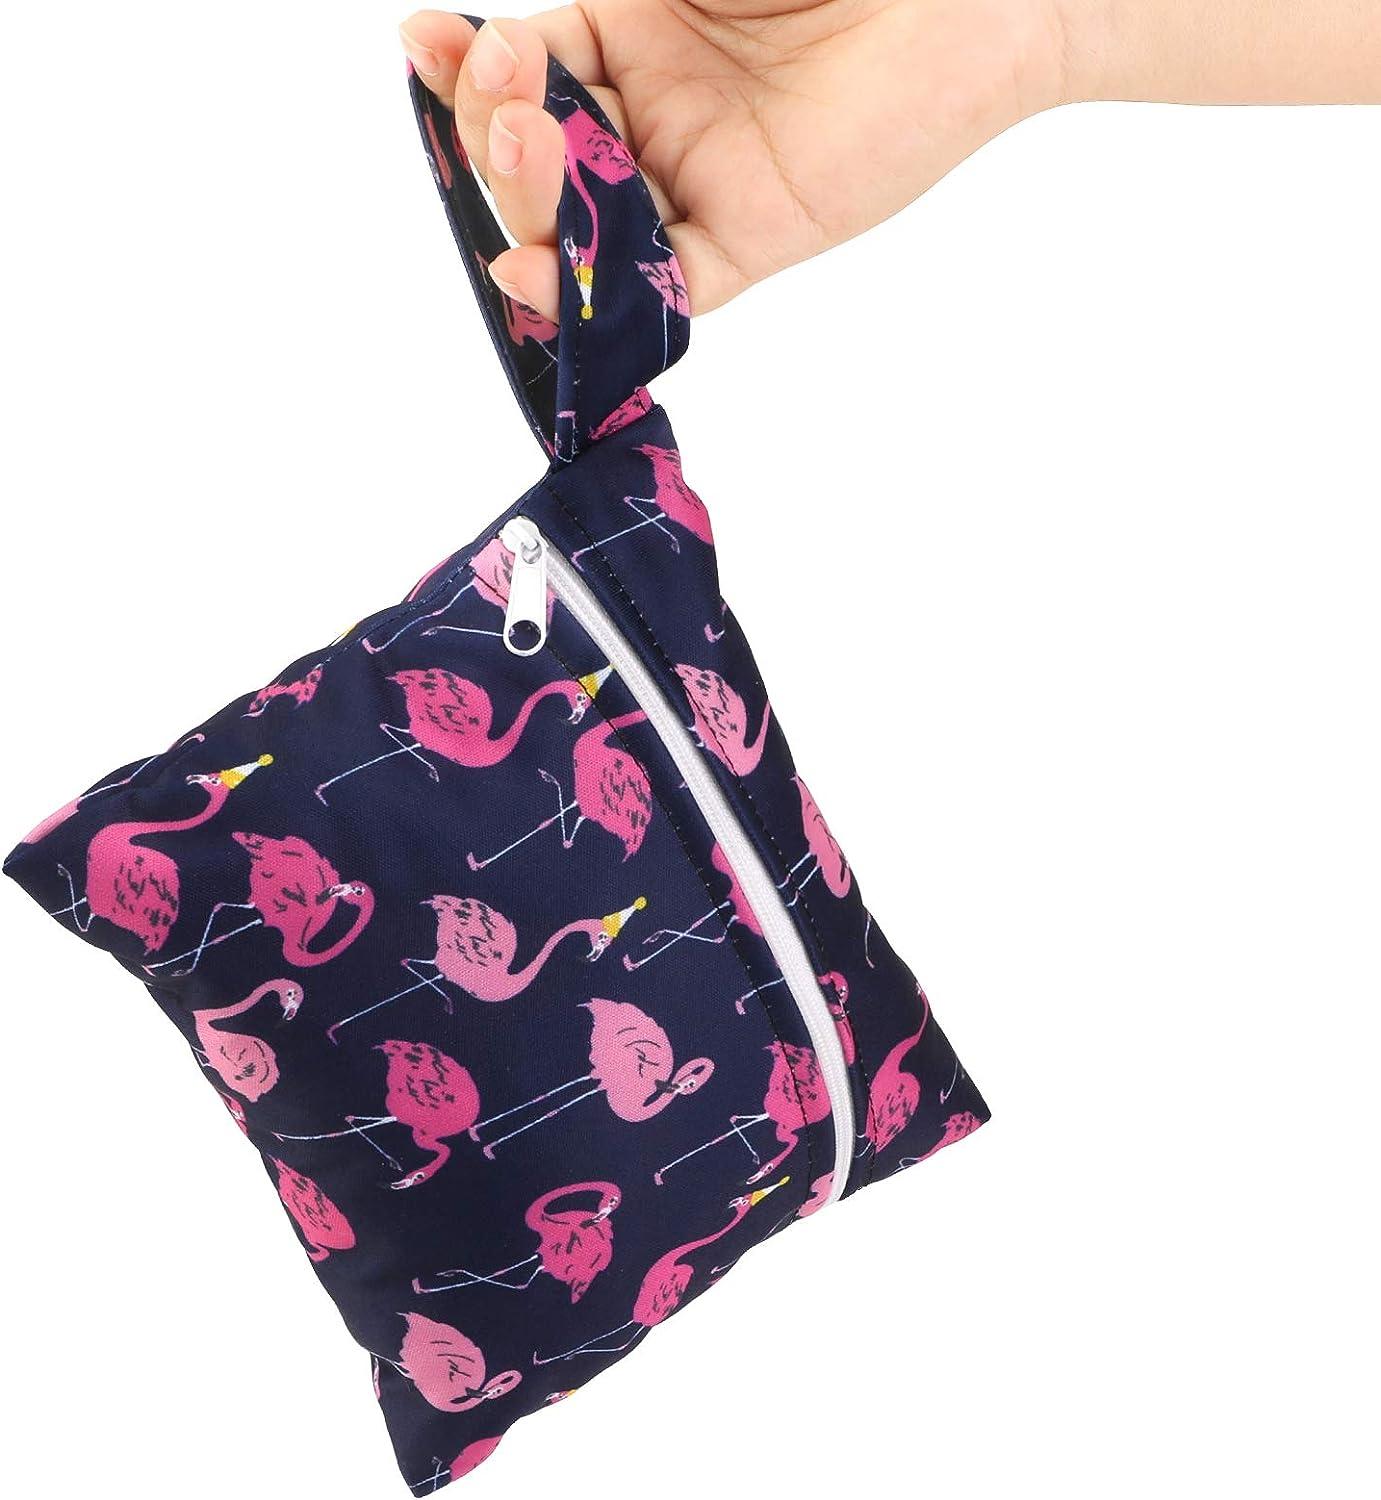 Buy Reusable Menstrual Pads (7 in 1, 25.4cm 4 Layers), Bamboo